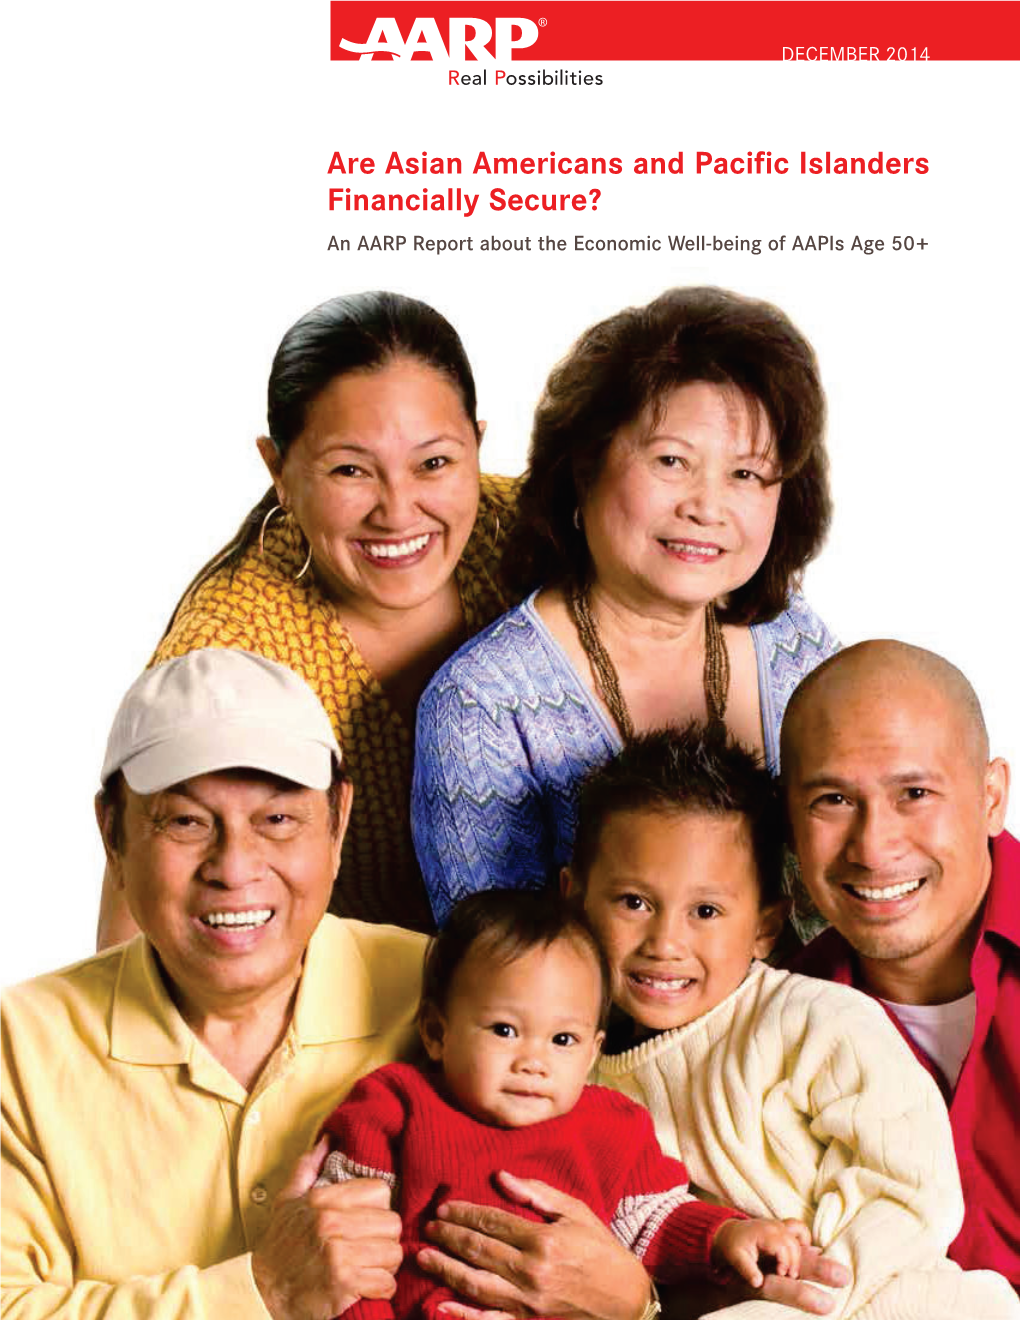 Are Asian Americans and Pacific Islanders Financially Secure?